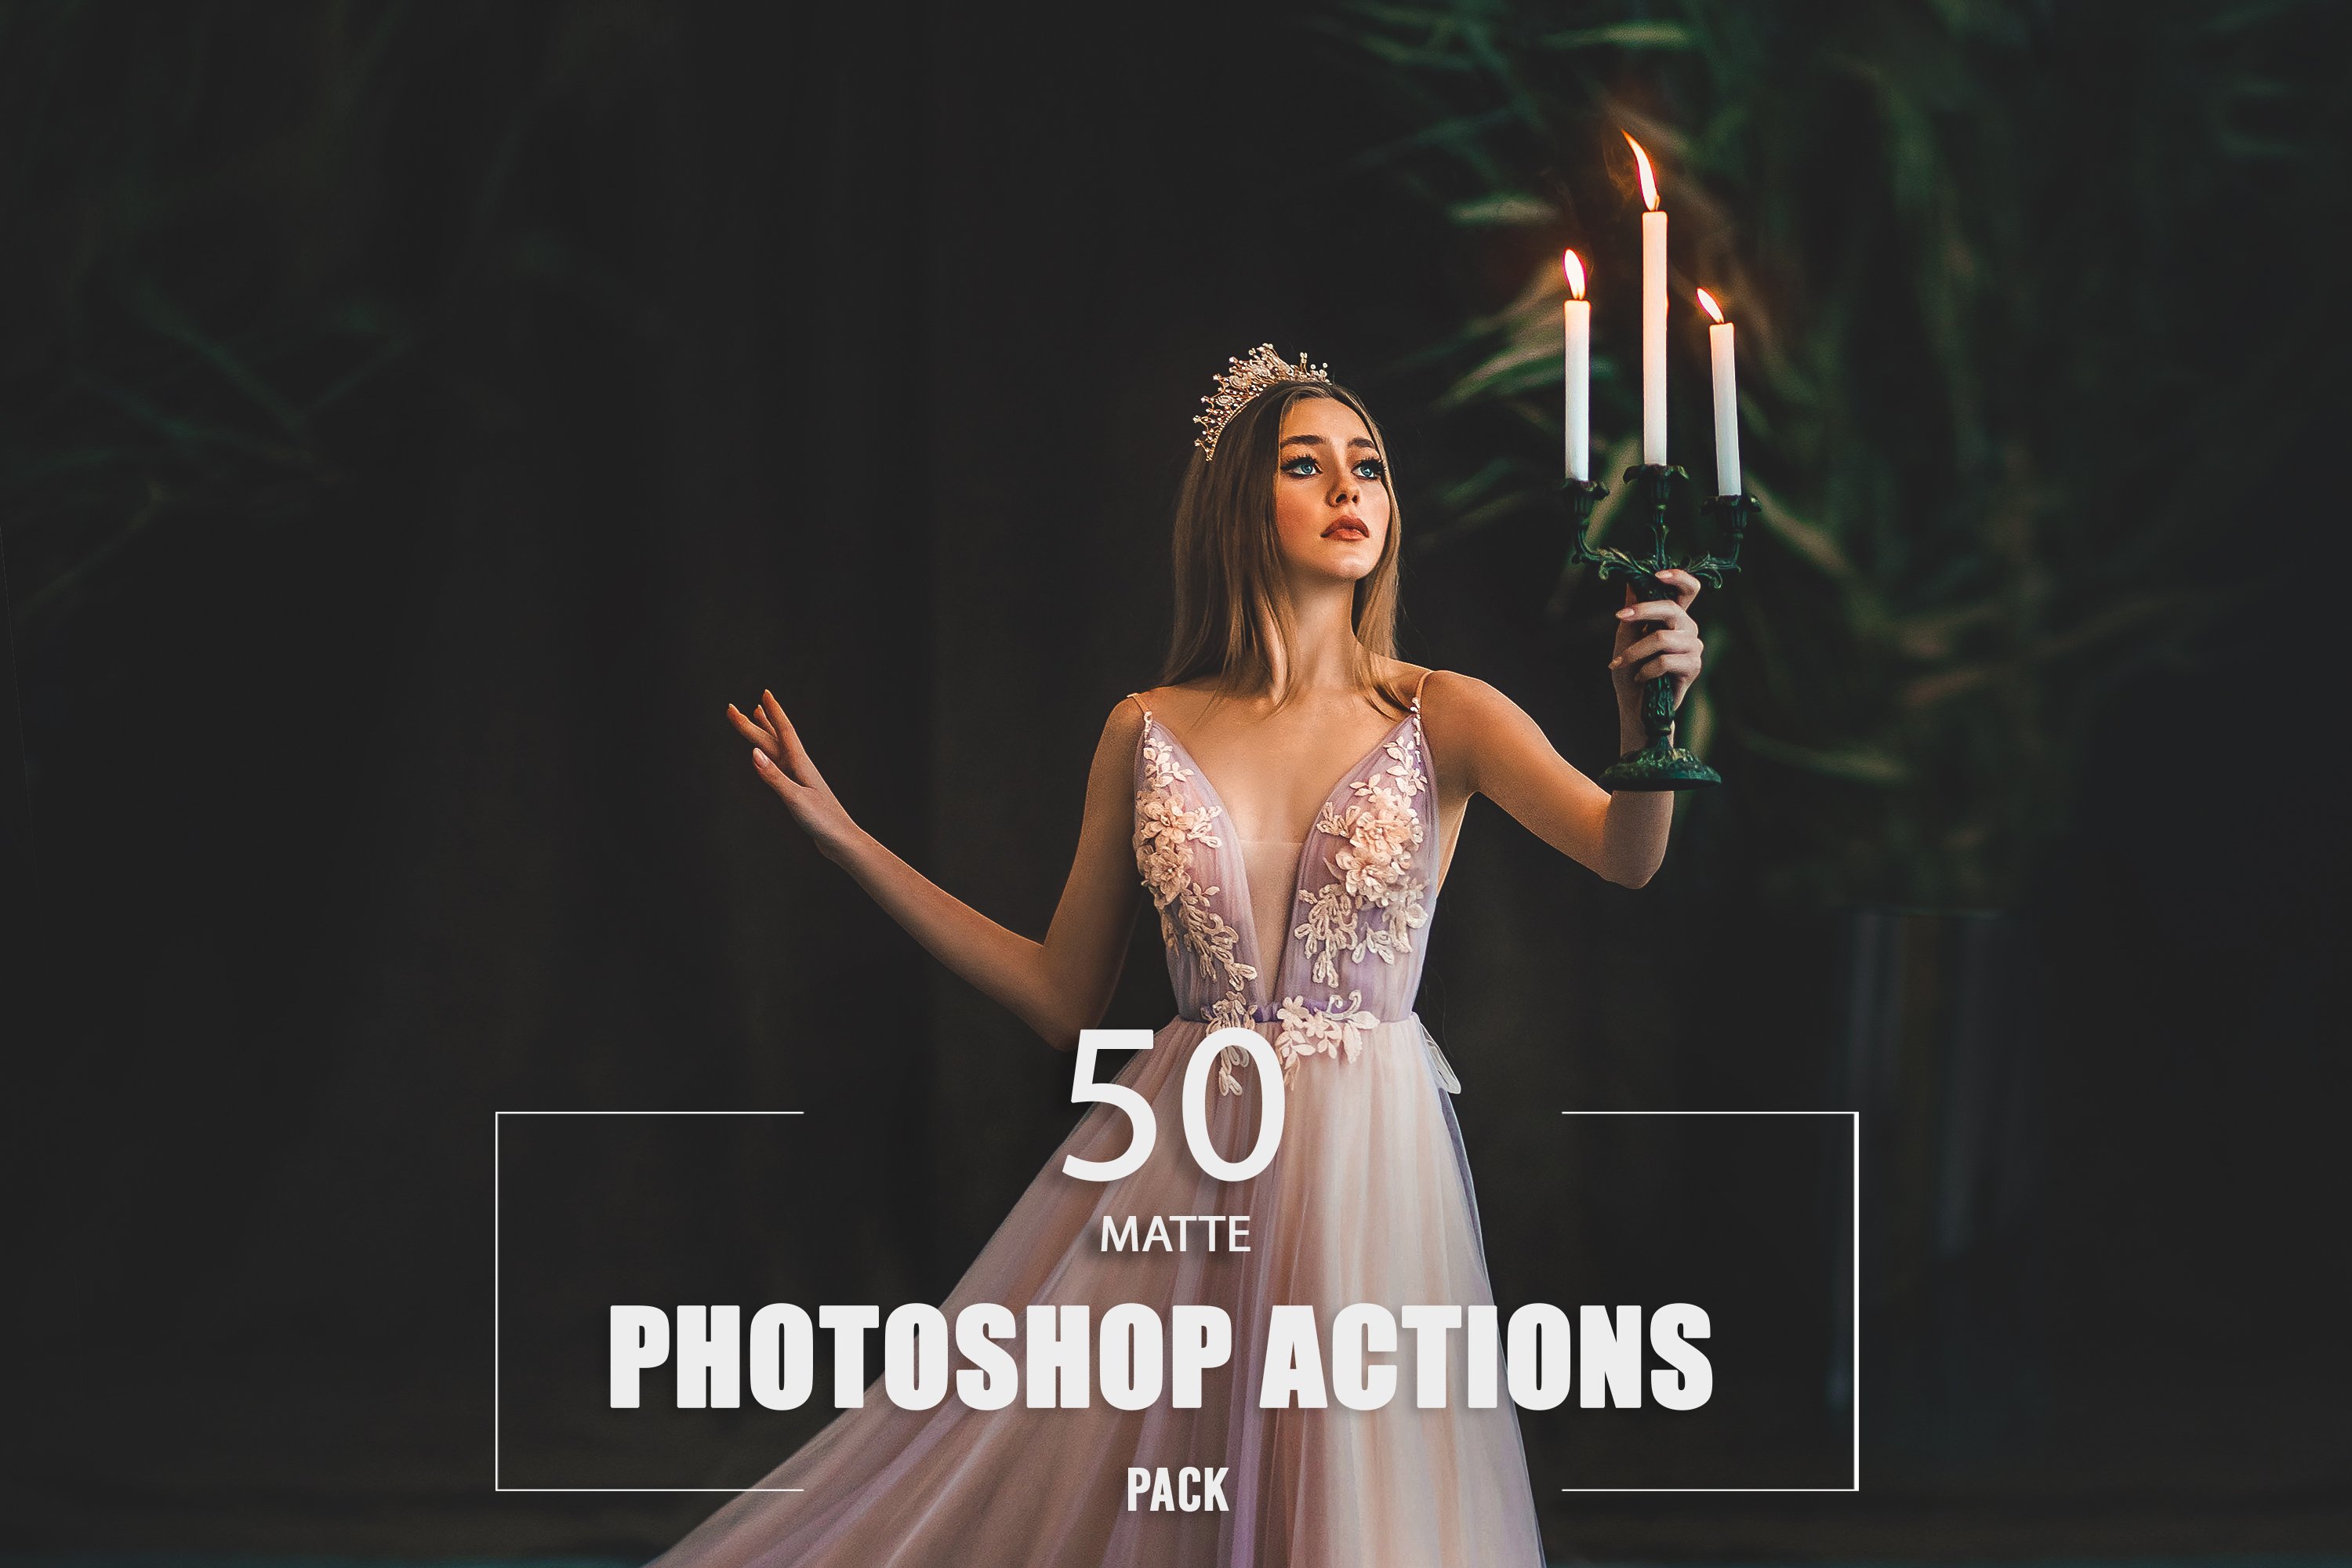 50 Matte Photoshop Actionscover image.